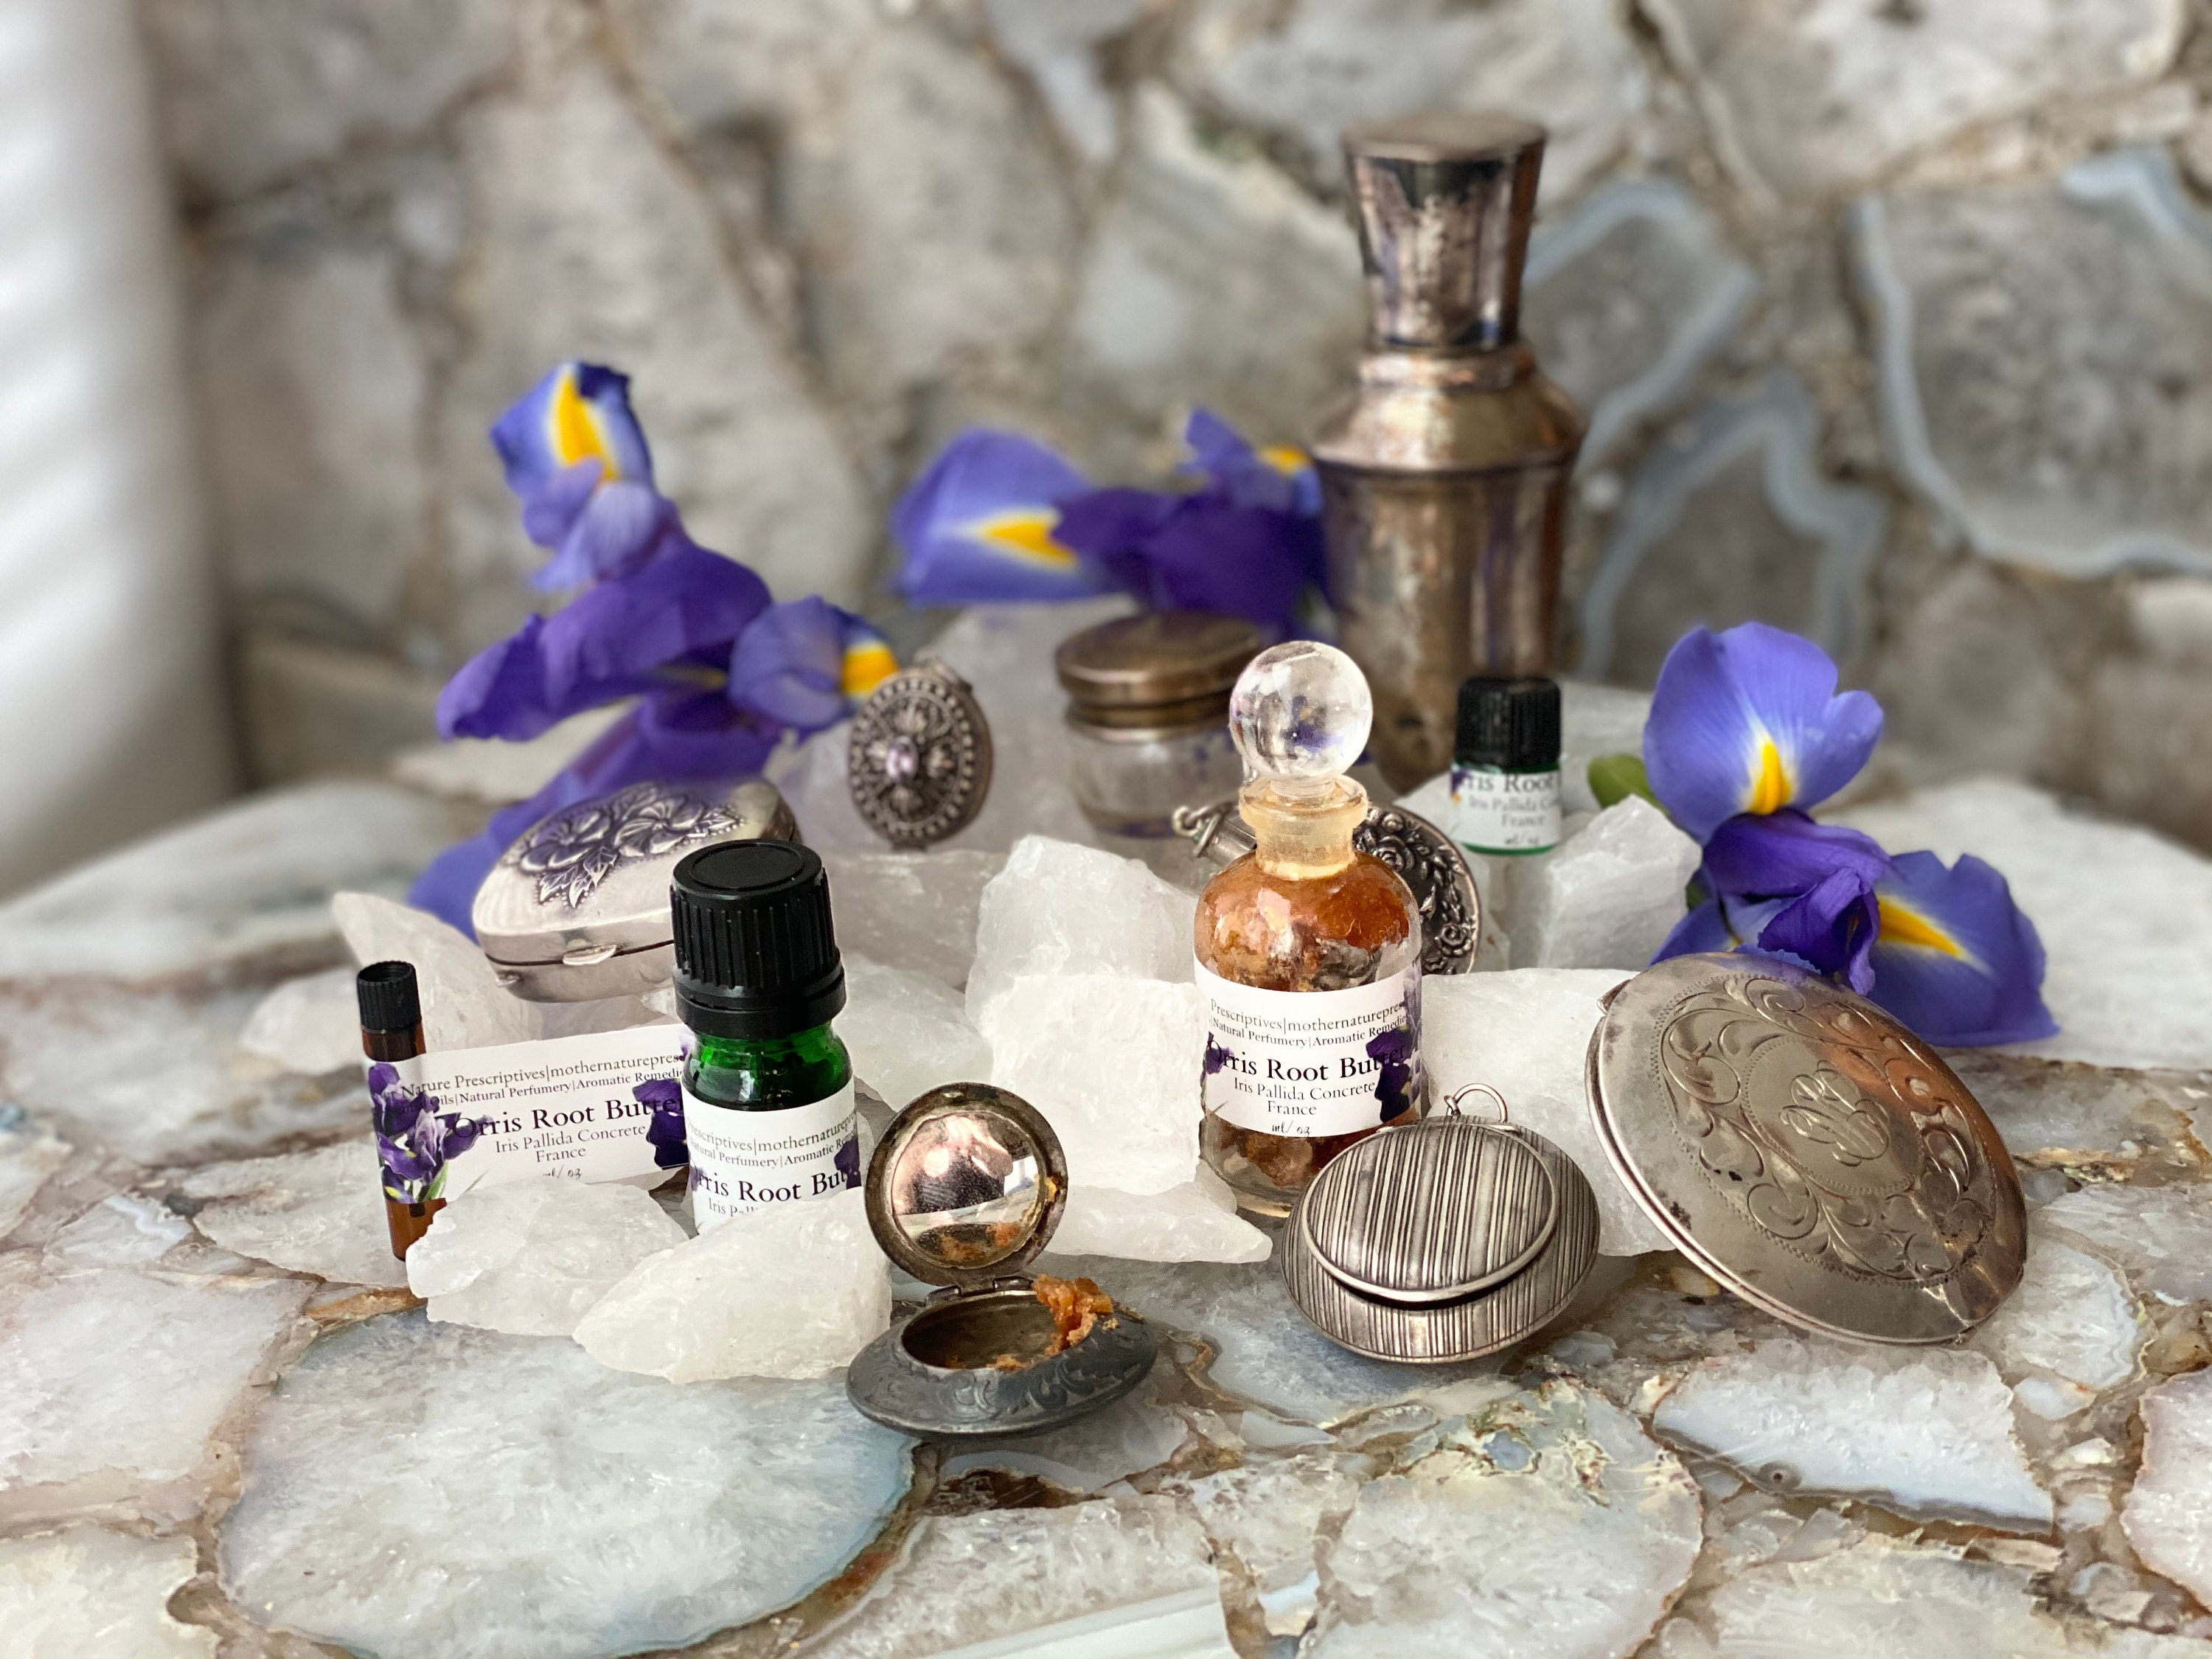 Iris Root Perfume Note Details - Why Orris Is So Expensive in